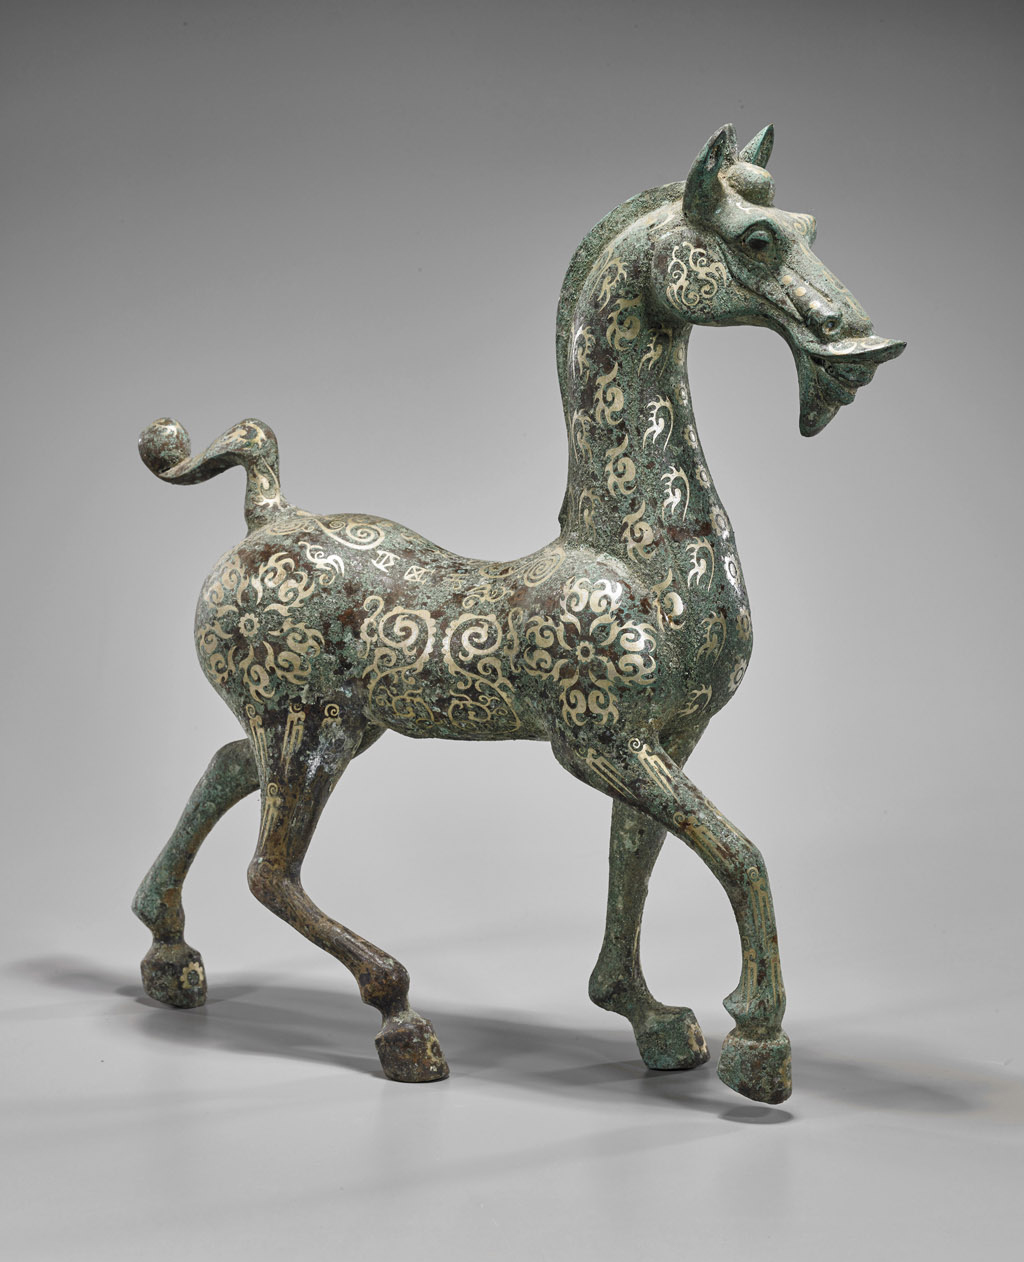 Chinese Han-style inlaid bronze prancing horse, inlaid archaistic flowers and designs to body, 17 1/2in high. Estimate $300-$500. I.M. Chait image.